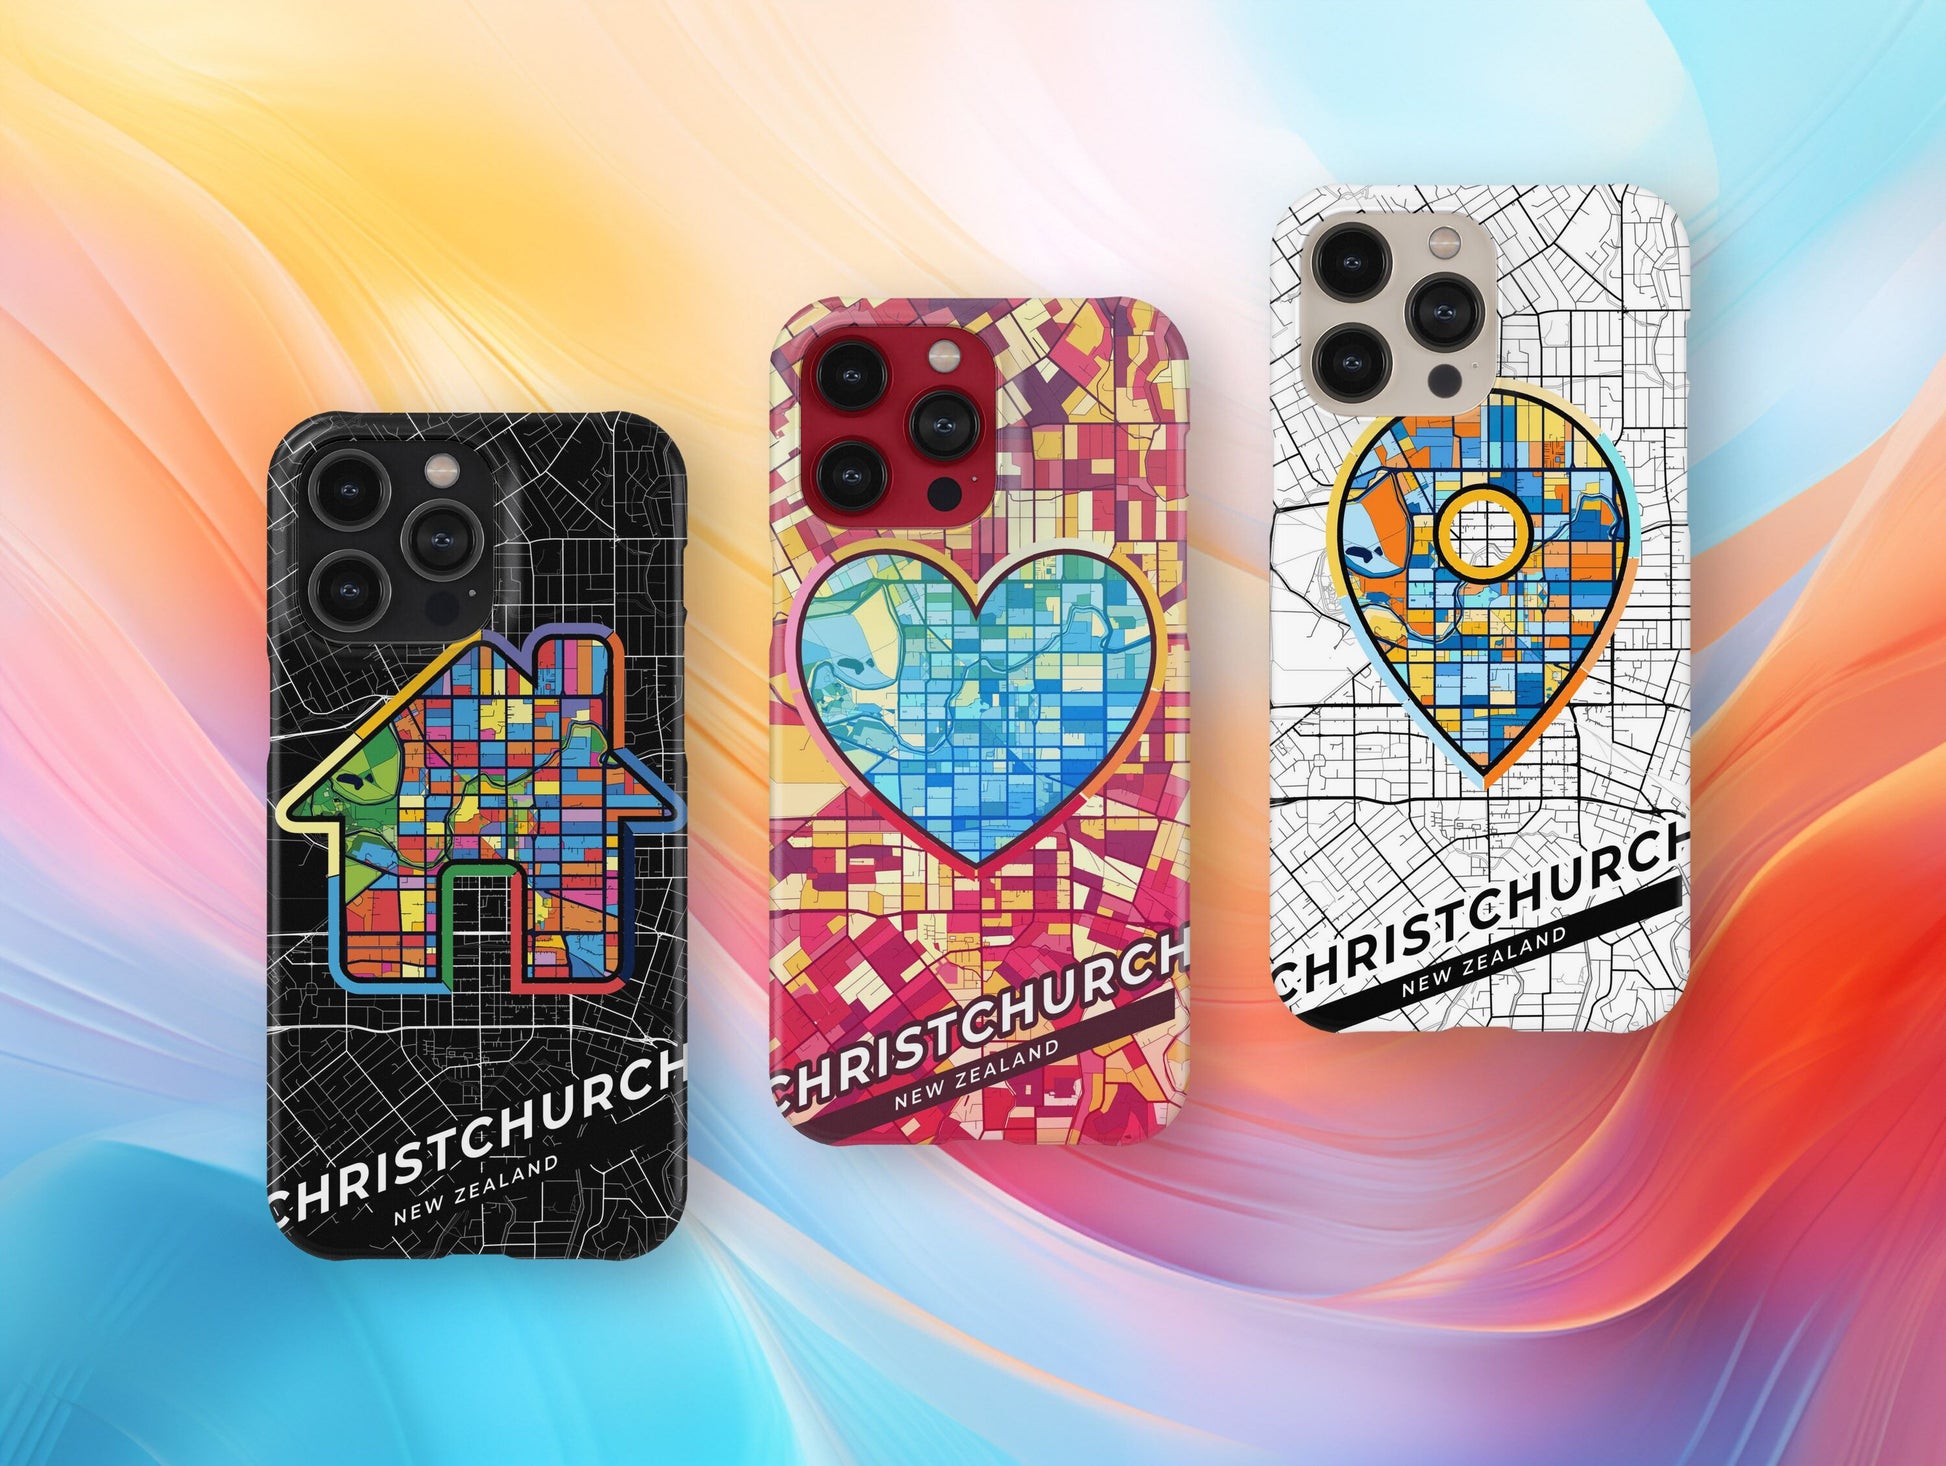 Christchurch New Zealand slim phone case with colorful icon. Birthday, wedding or housewarming gift. Couple match cases.